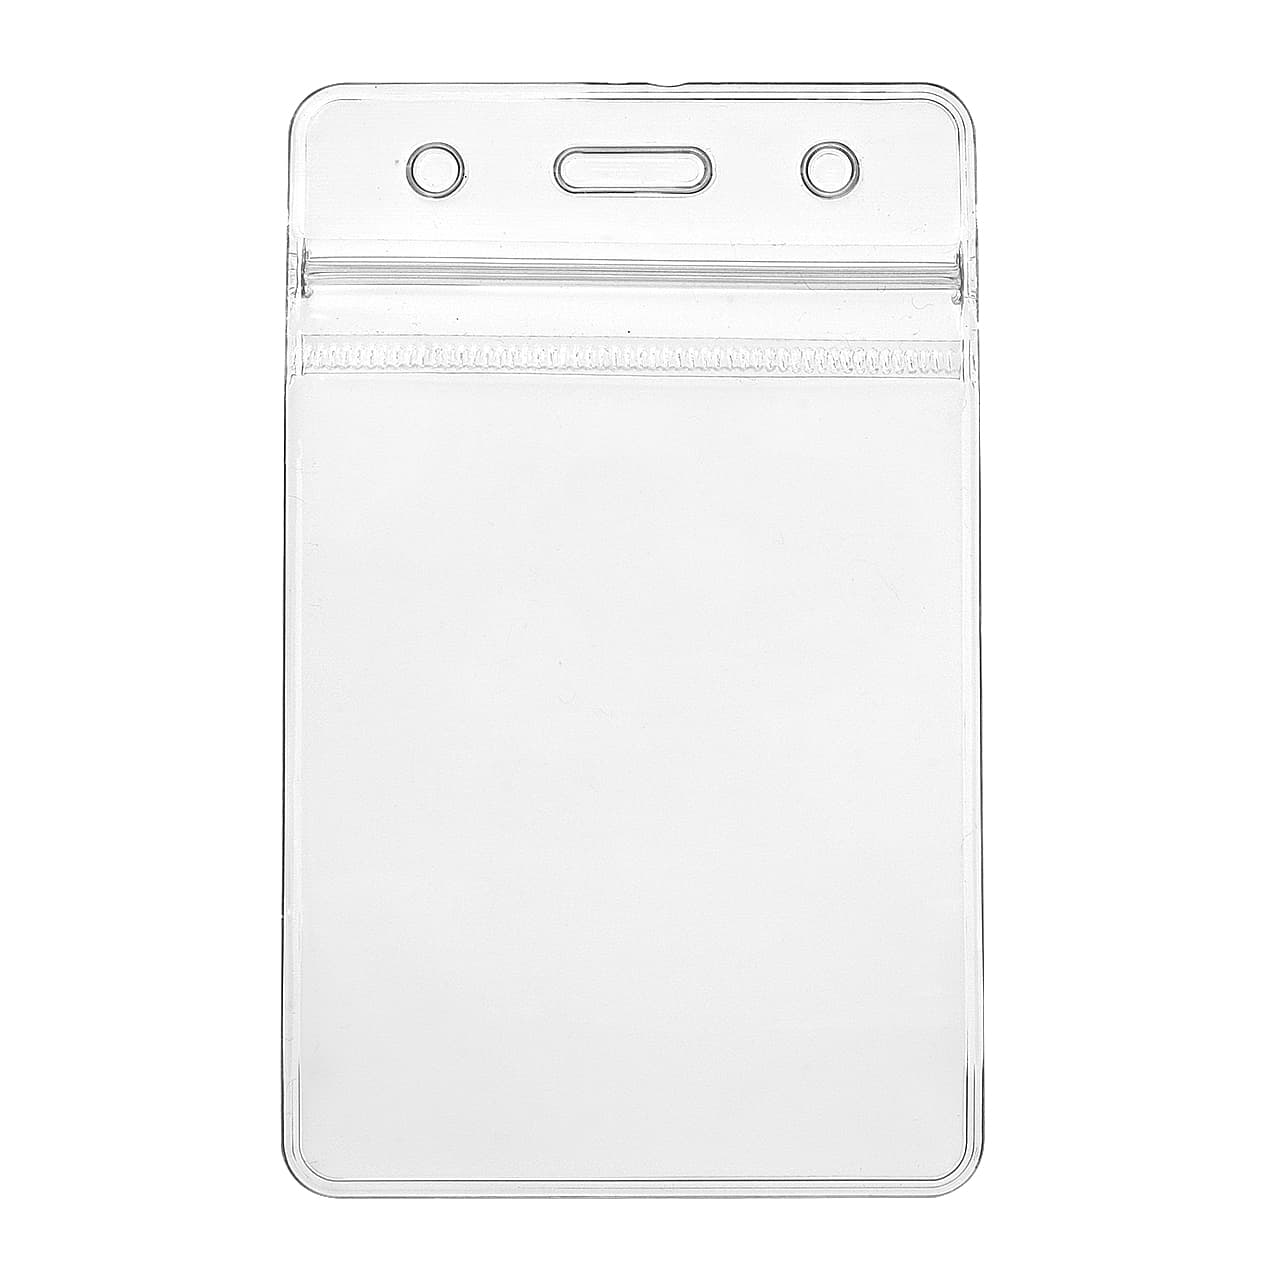 https://giftstomorrow.co.uk/wp-content/uploads/2021/08/GT-Clear-Single-Sided-Vertical-11-x-6.8cm.jpg